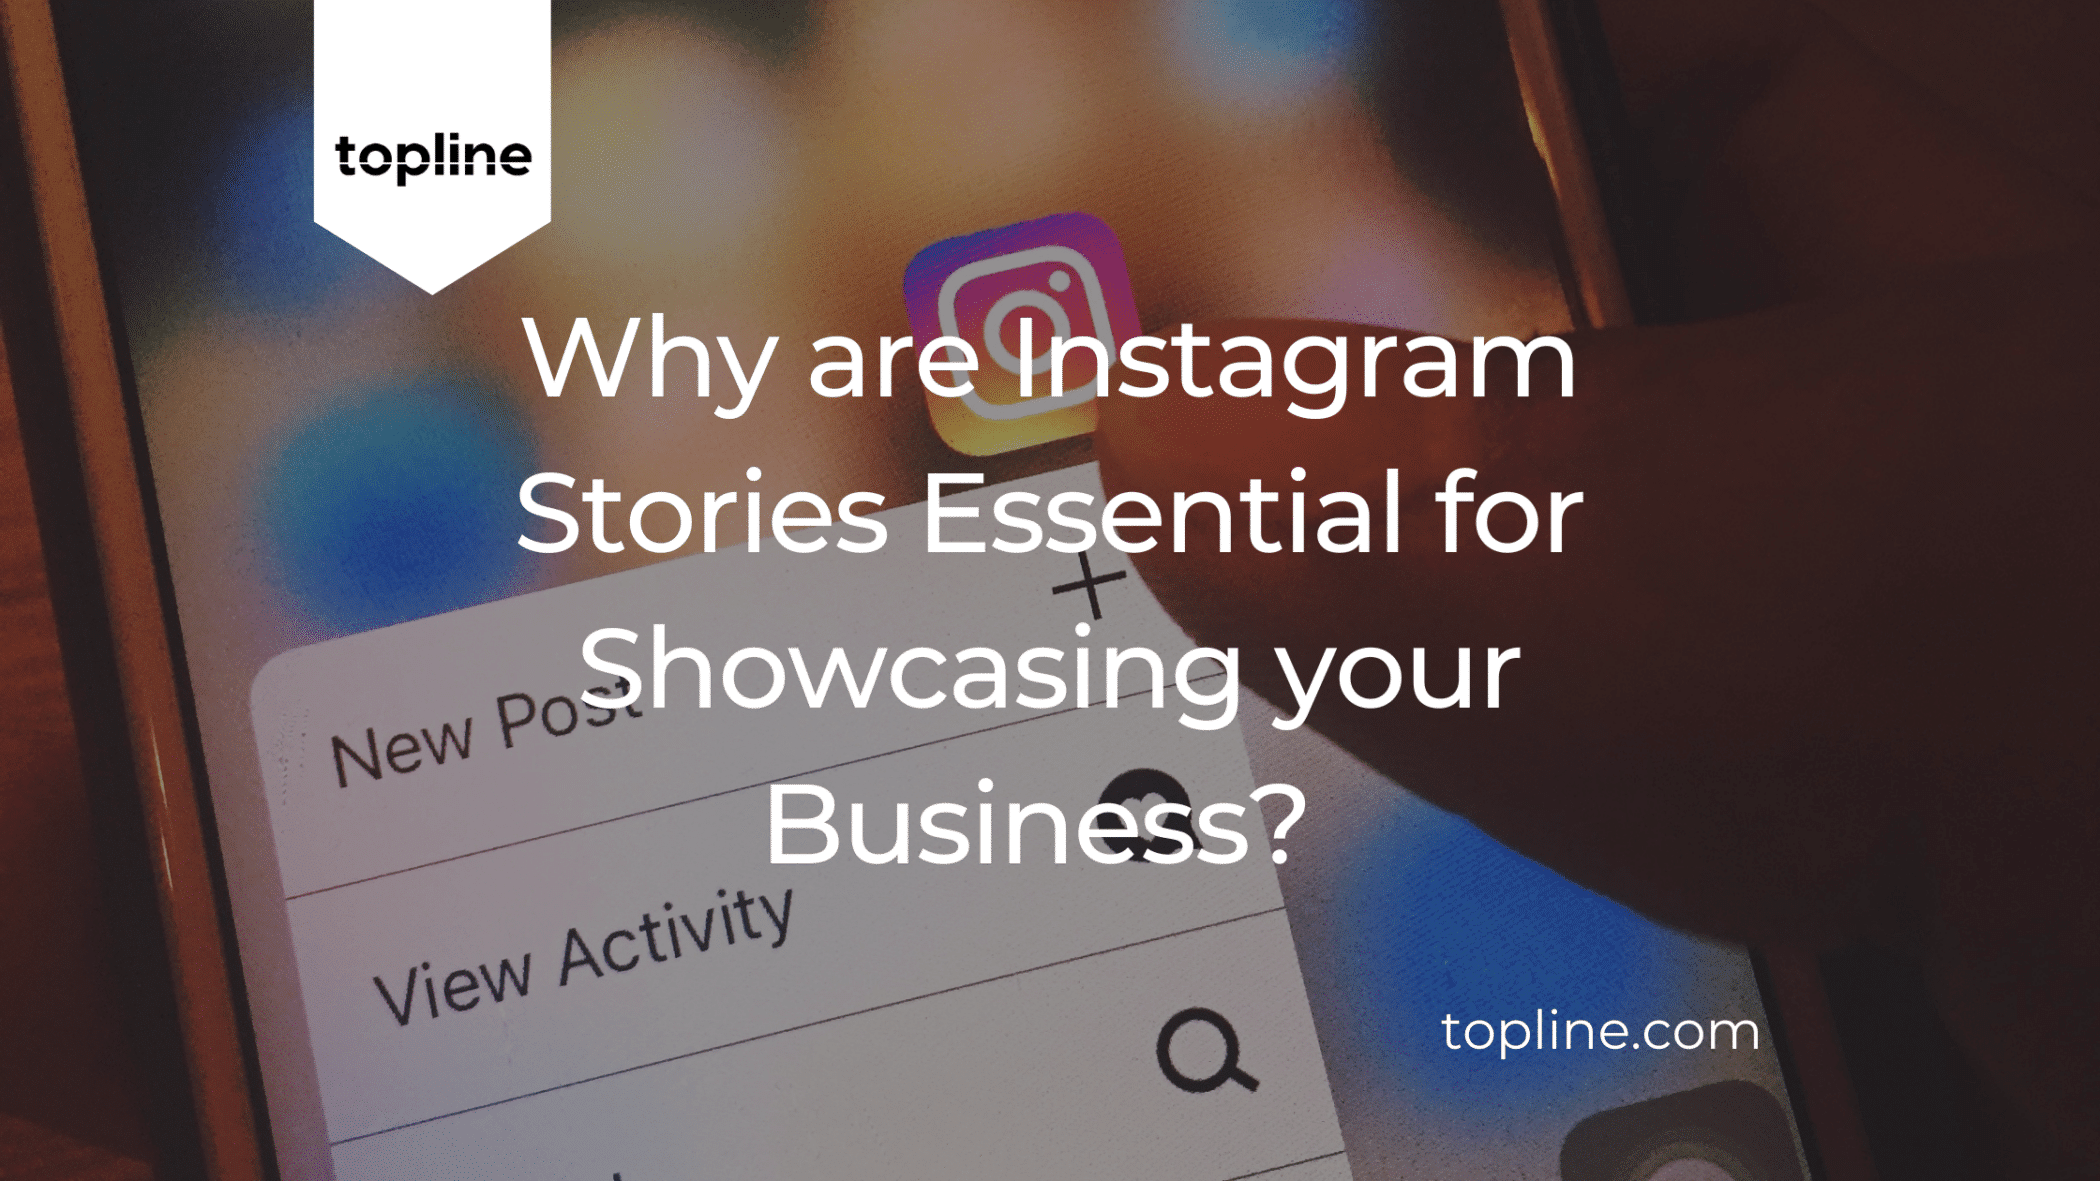 Why are Instagram Stories Essential for Showcasing your Business?